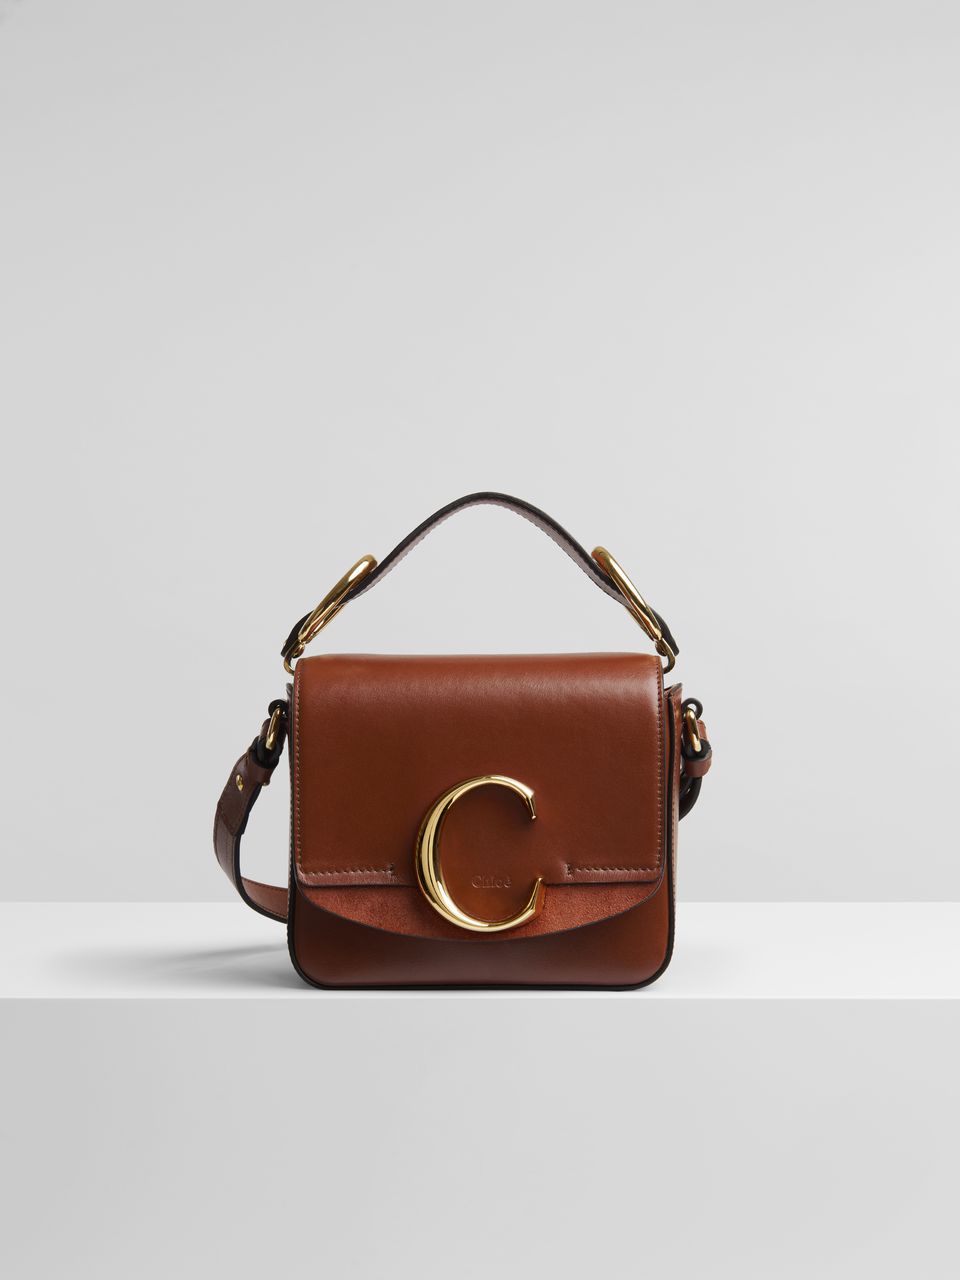 Chloe Spring/Summer 2019 Bag Collection Features The C Bag